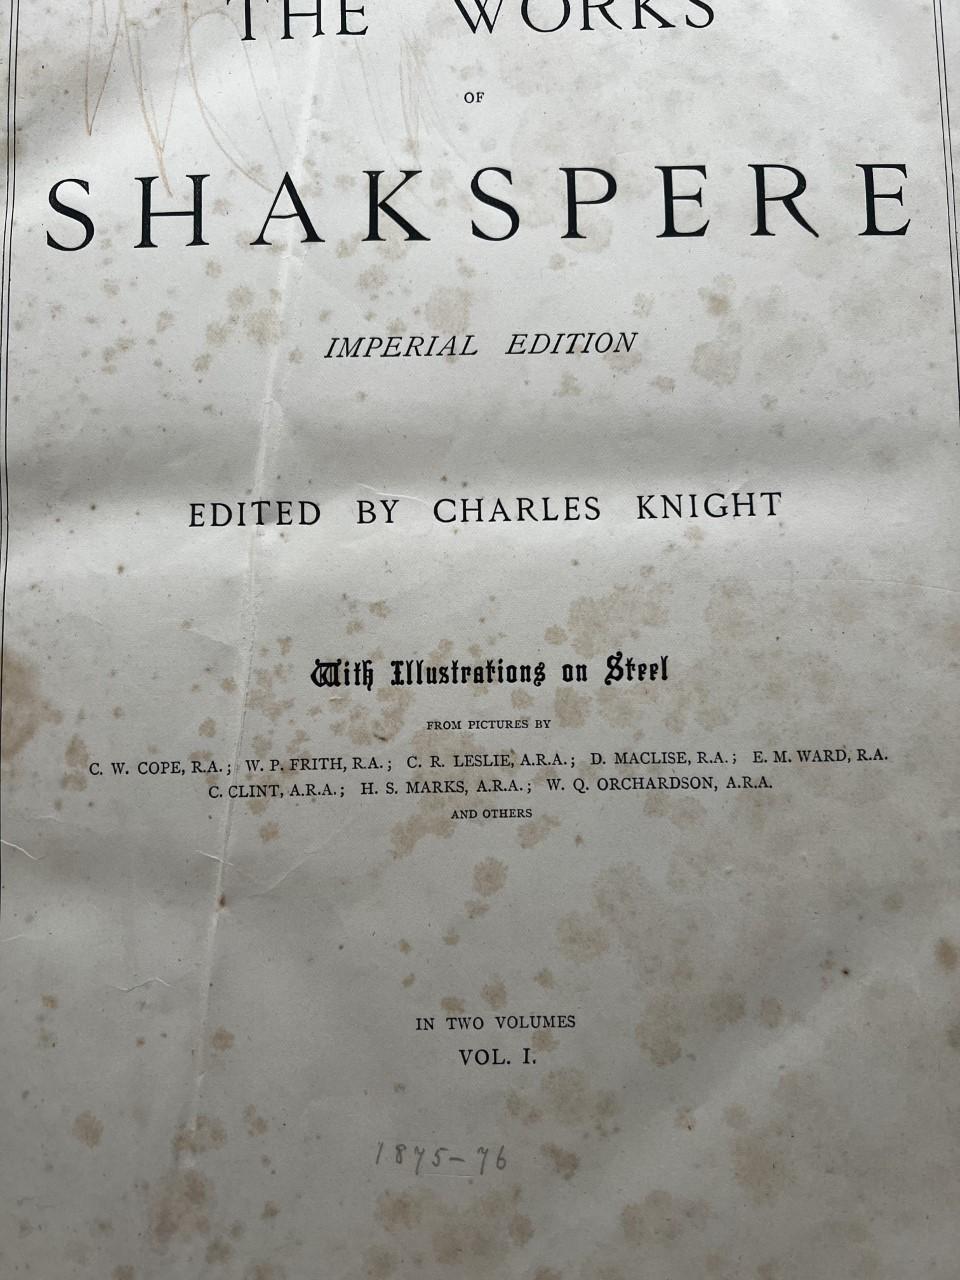 Works of Shakespere Imperial Edition by Charles Knight Vol i with Golden Edges In Good Condition For Sale In Doha, QA